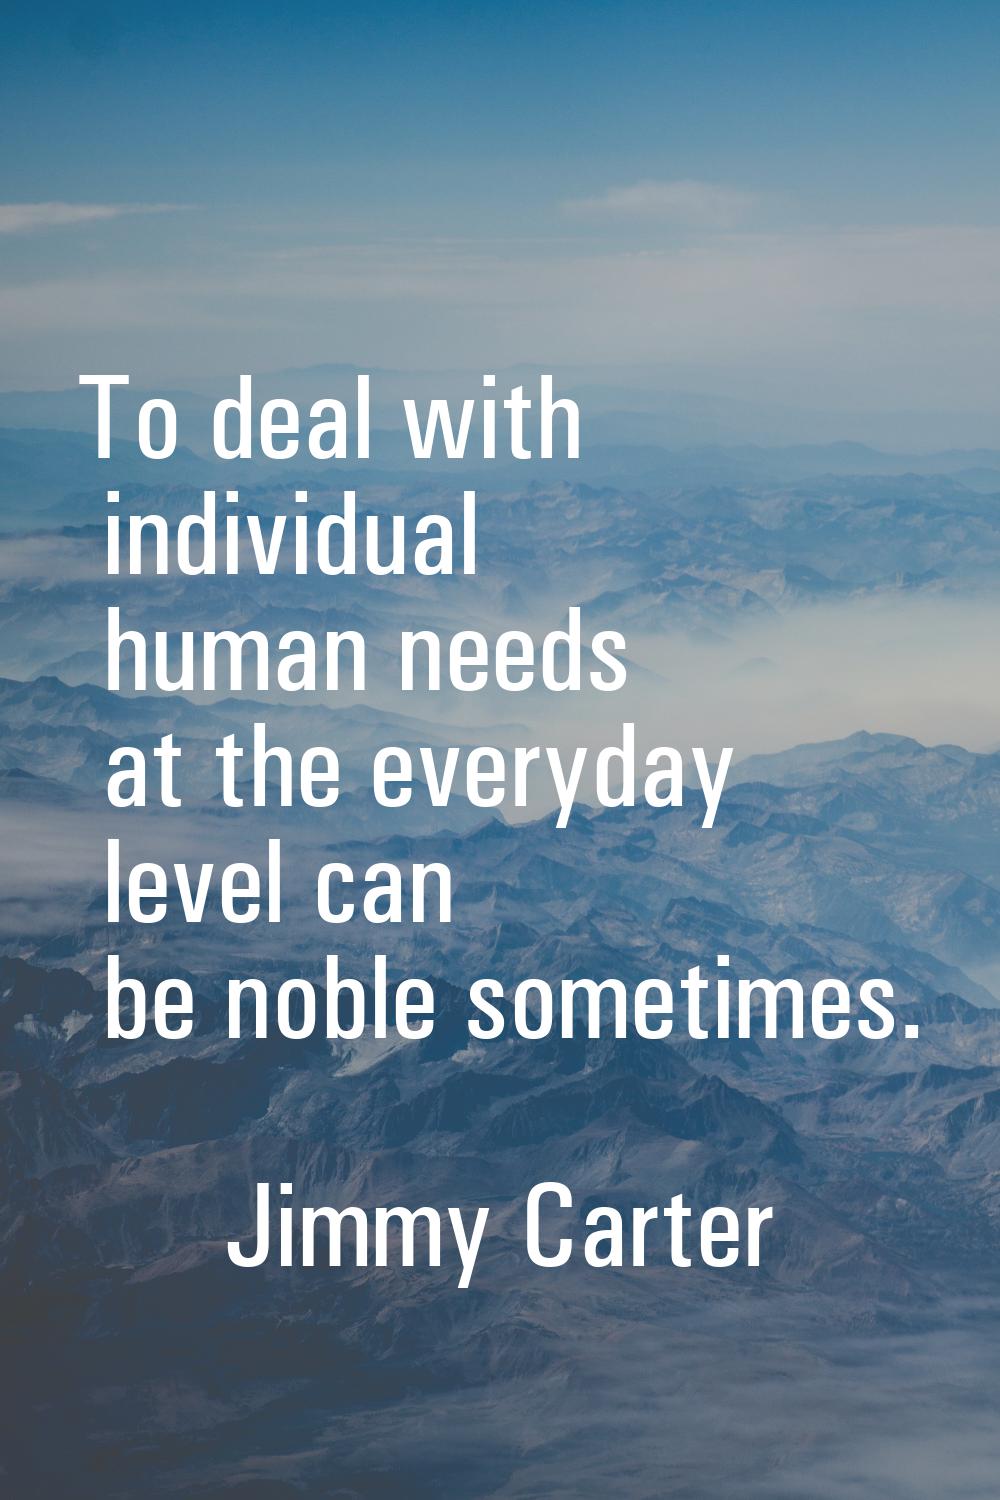 To deal with individual human needs at the everyday level can be noble sometimes.